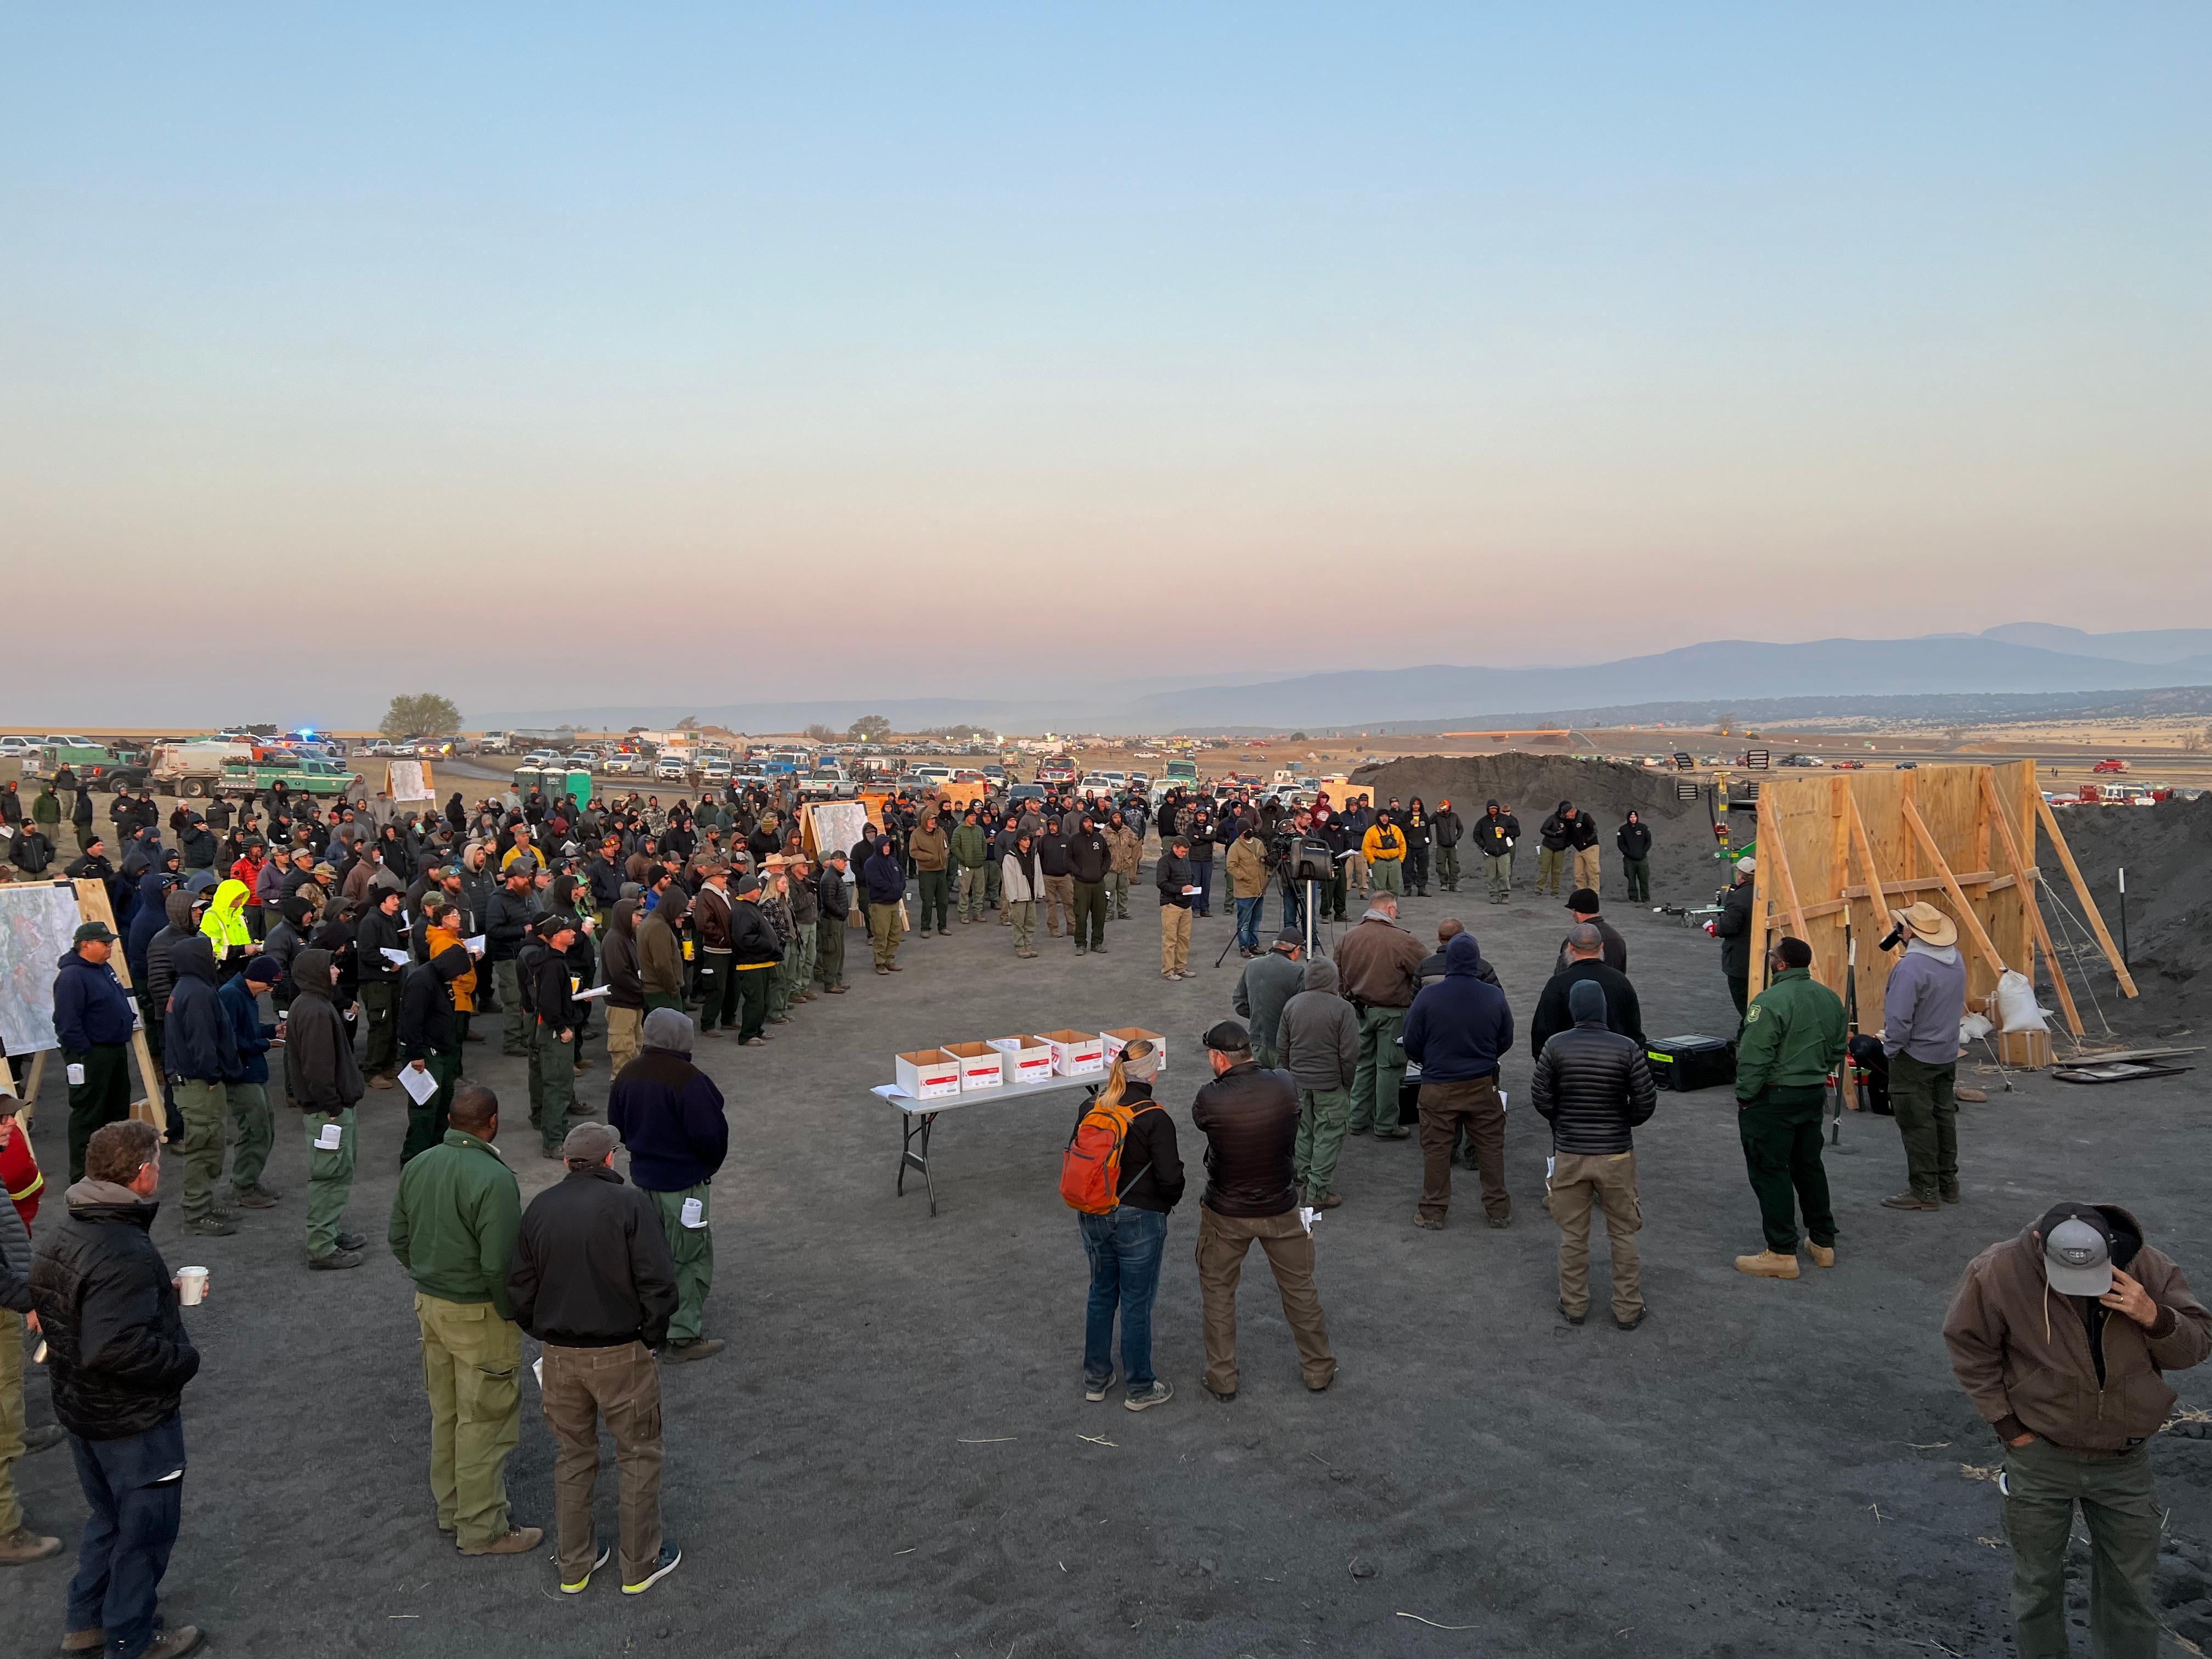 Firefighters gather for their morning meeting at a new fire camp along I-25 north of Las Vegas New Mexico on May 5, 2022.